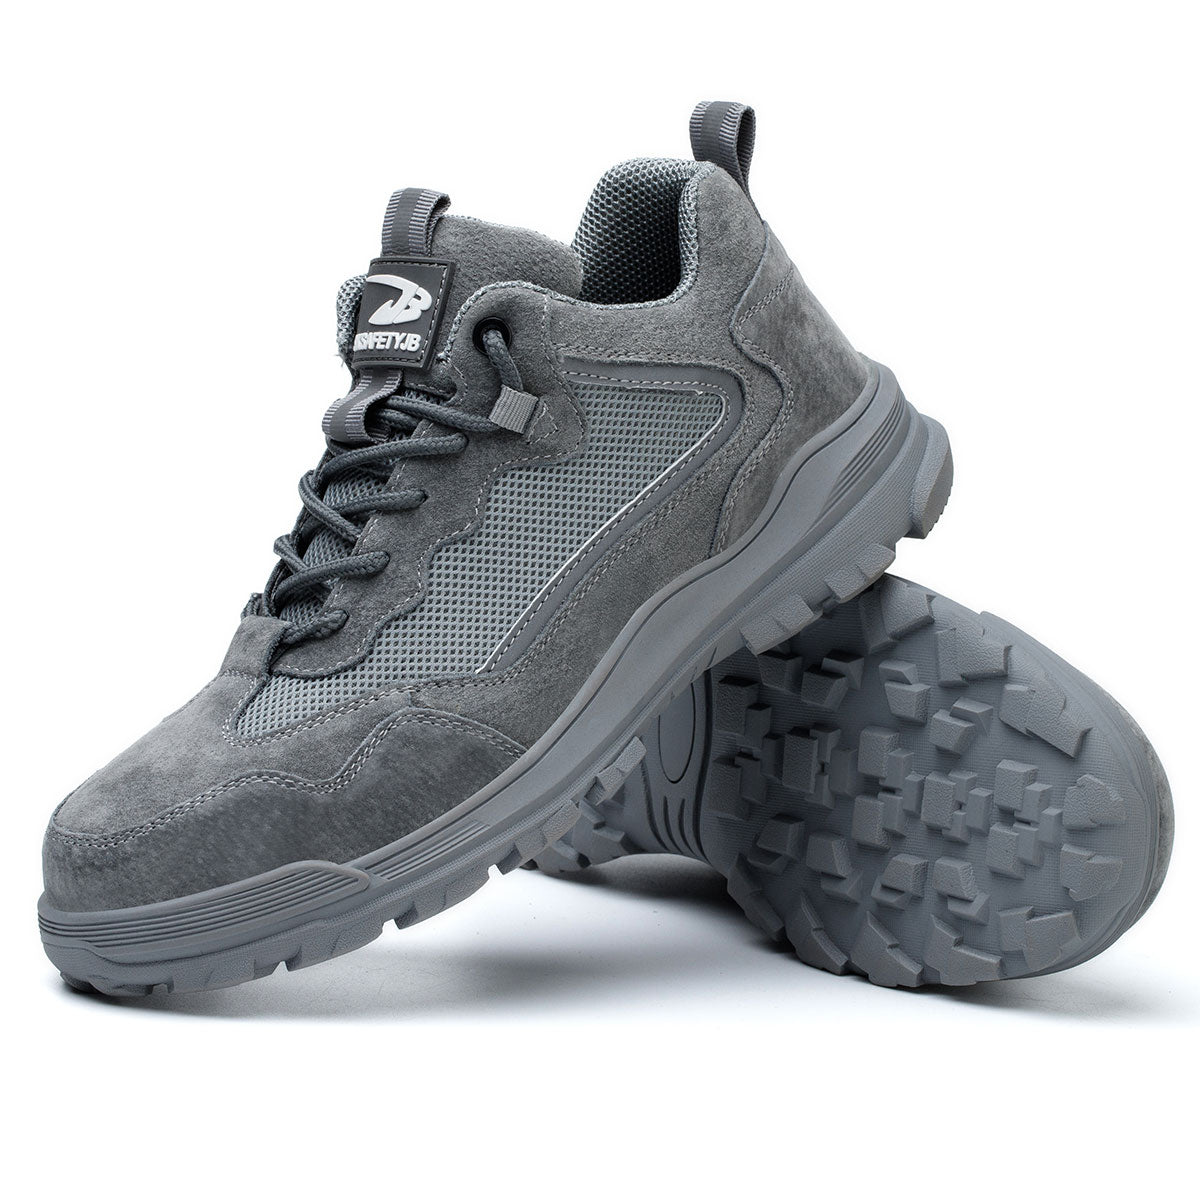 Base Protection - B0672 SMASH S1P SRC in Stock. #BaseProtection #safety  #shoes #FeelTheComfort